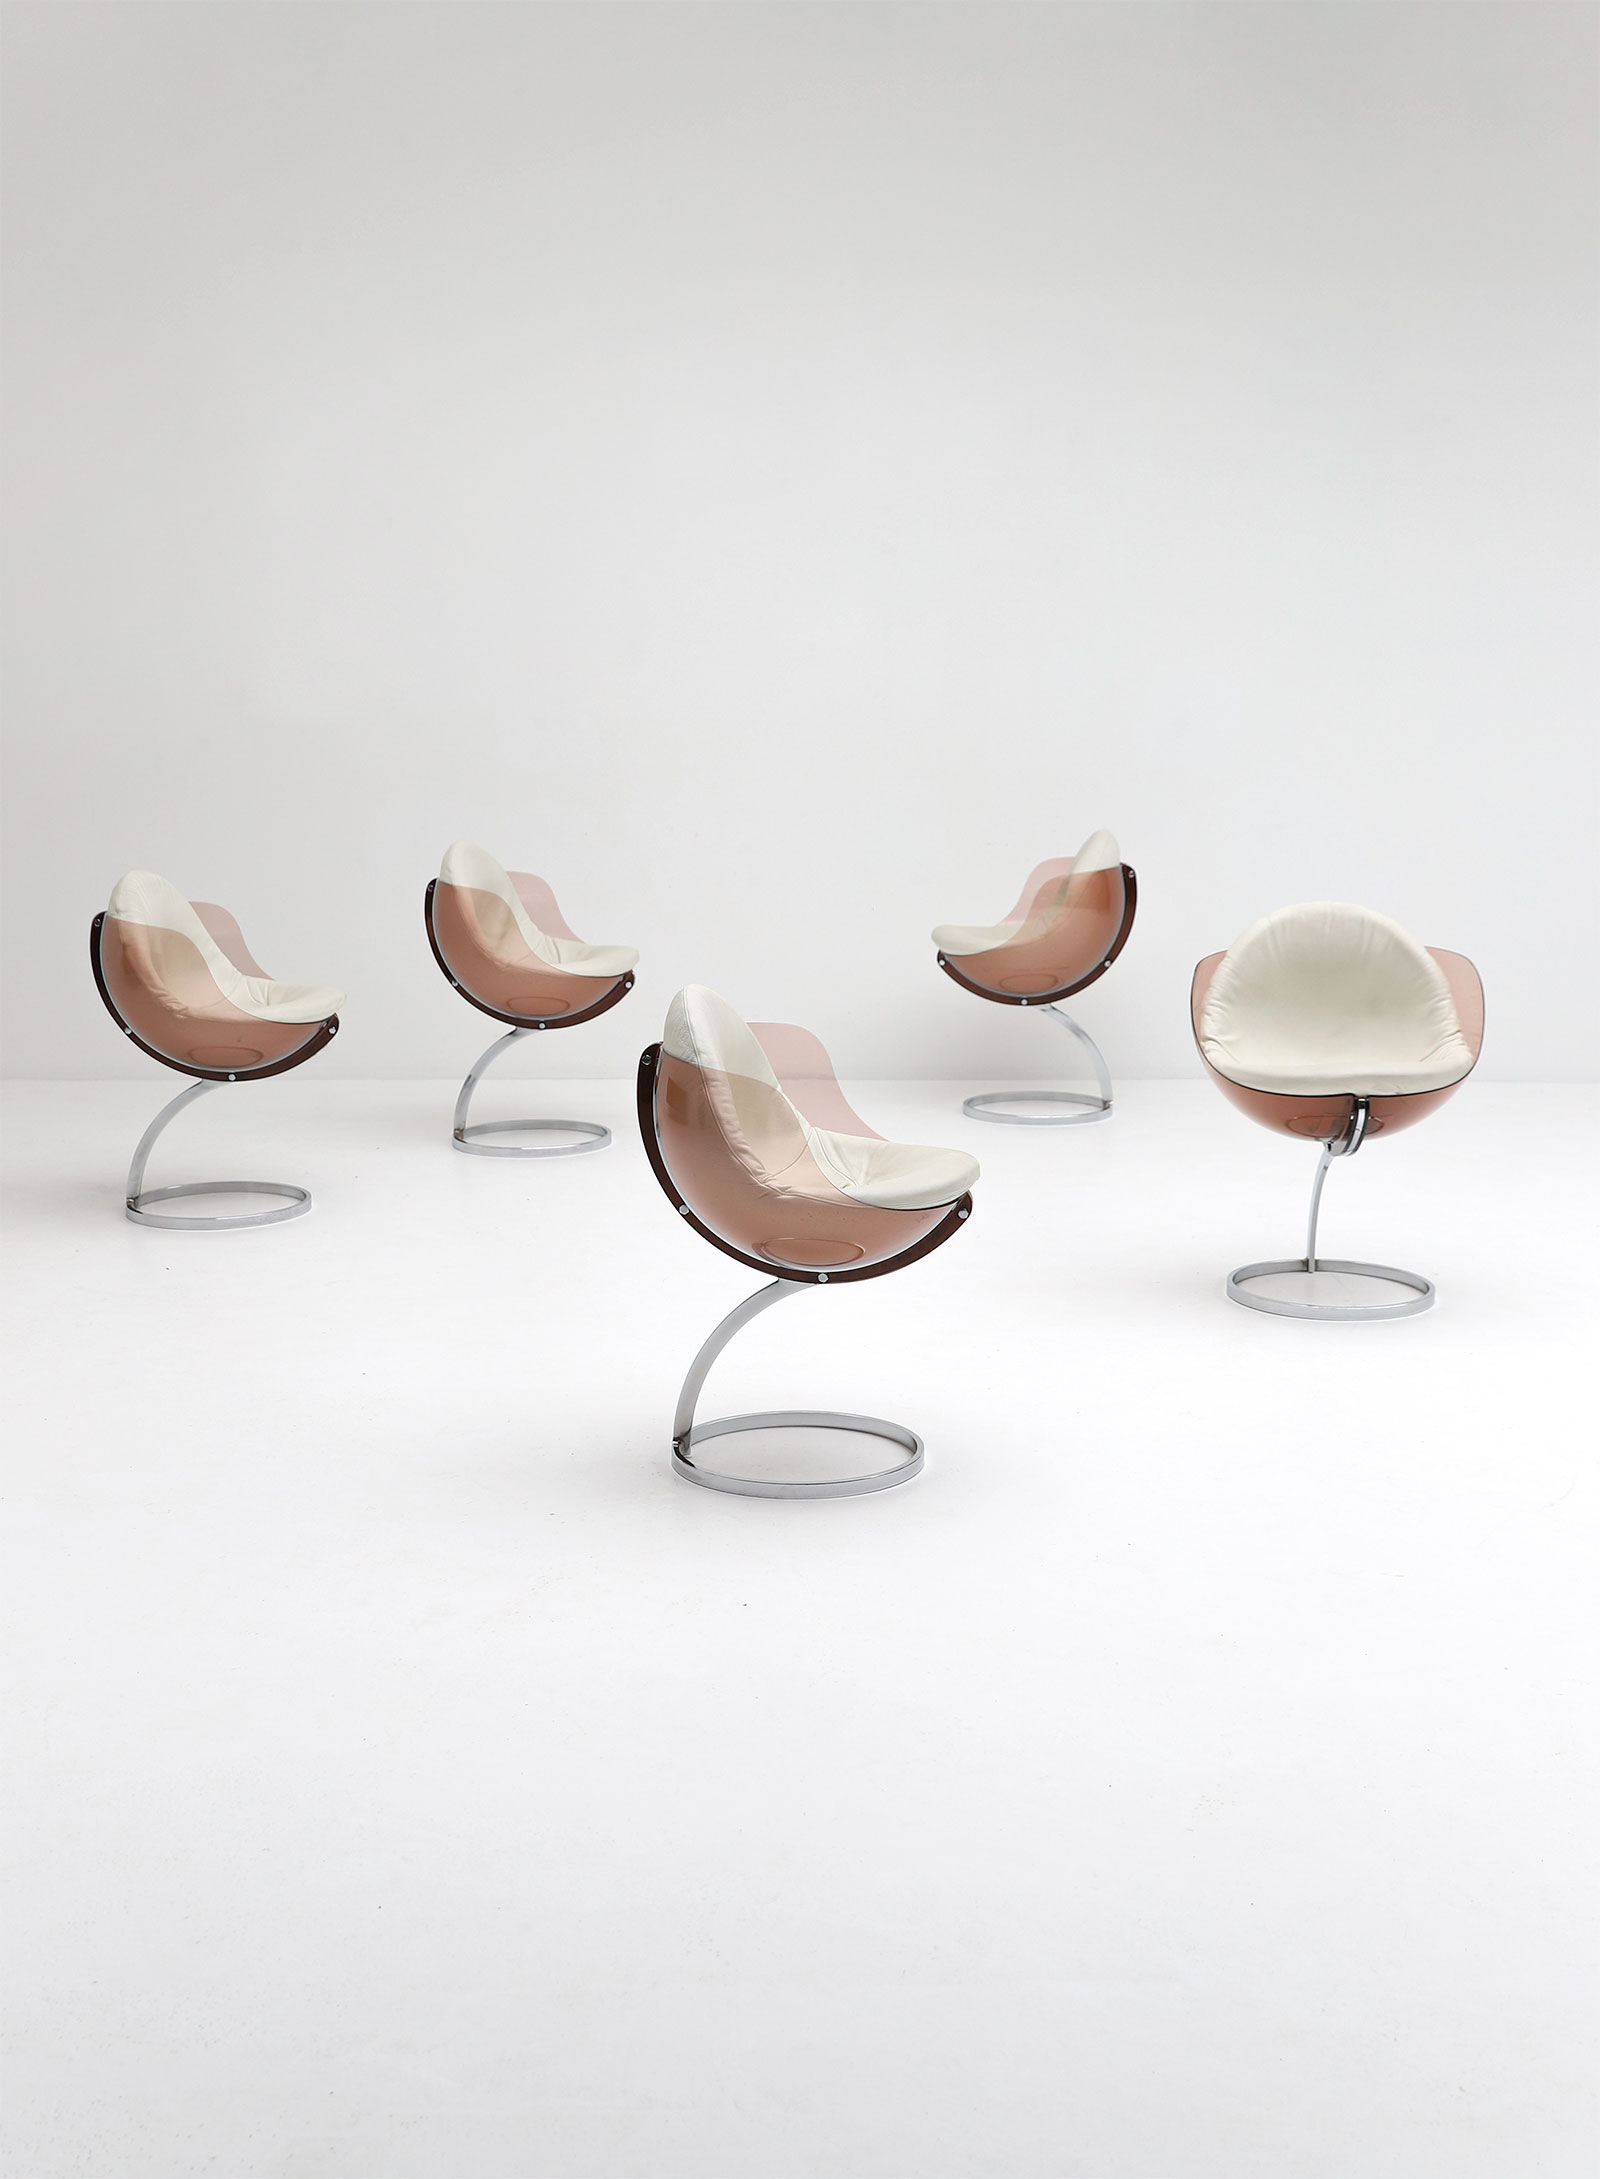 Sphere chair designed by Boris Tabacoffimage 1